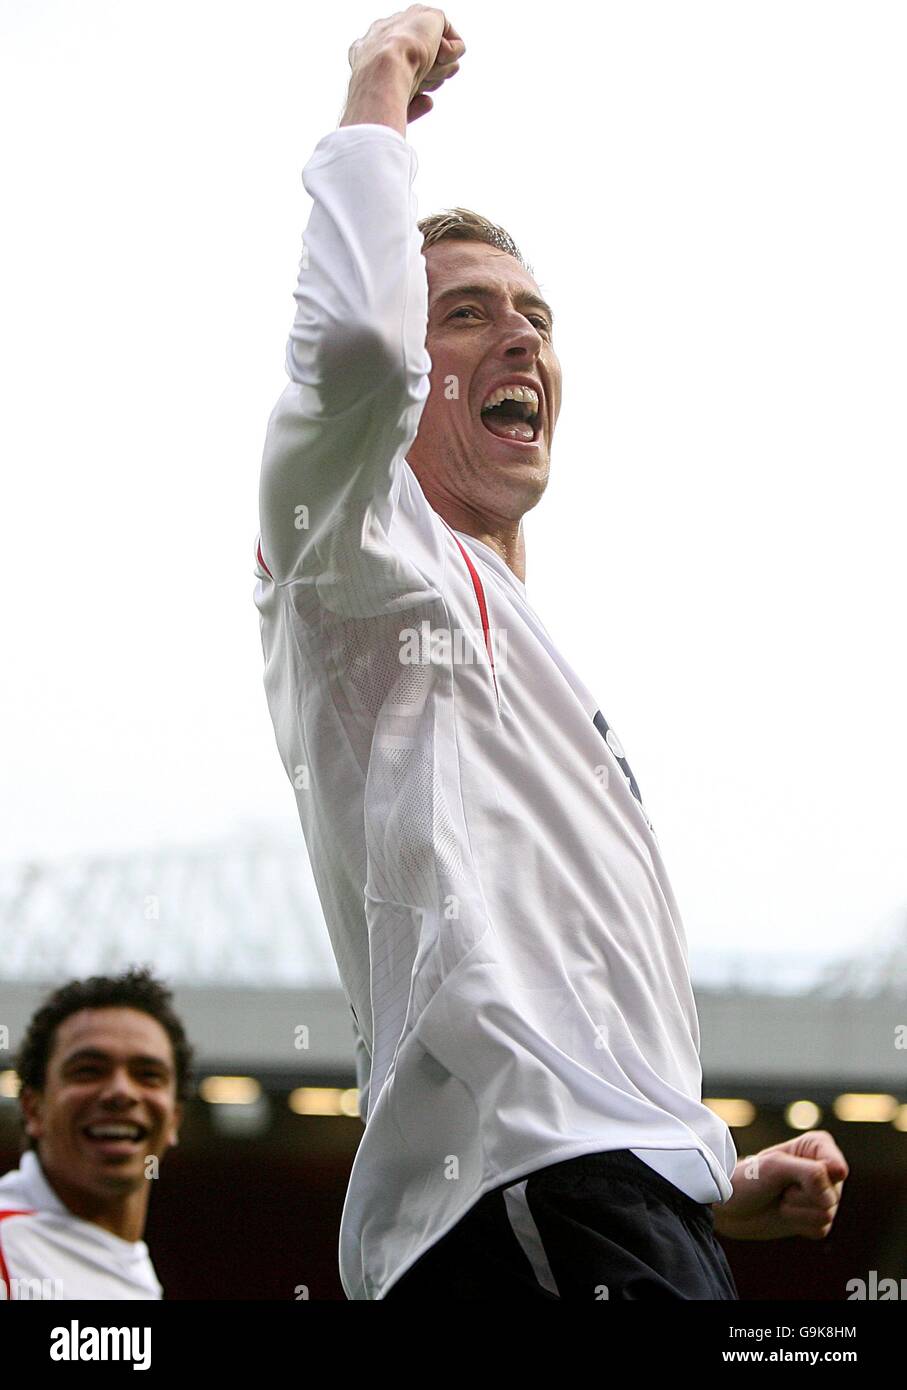 Soccer - UEFA European Championship 2008 Qualifying - Group E - England v Andorra - Old Trafford. England's Peter Crouch celebrates a goal Stock Photo